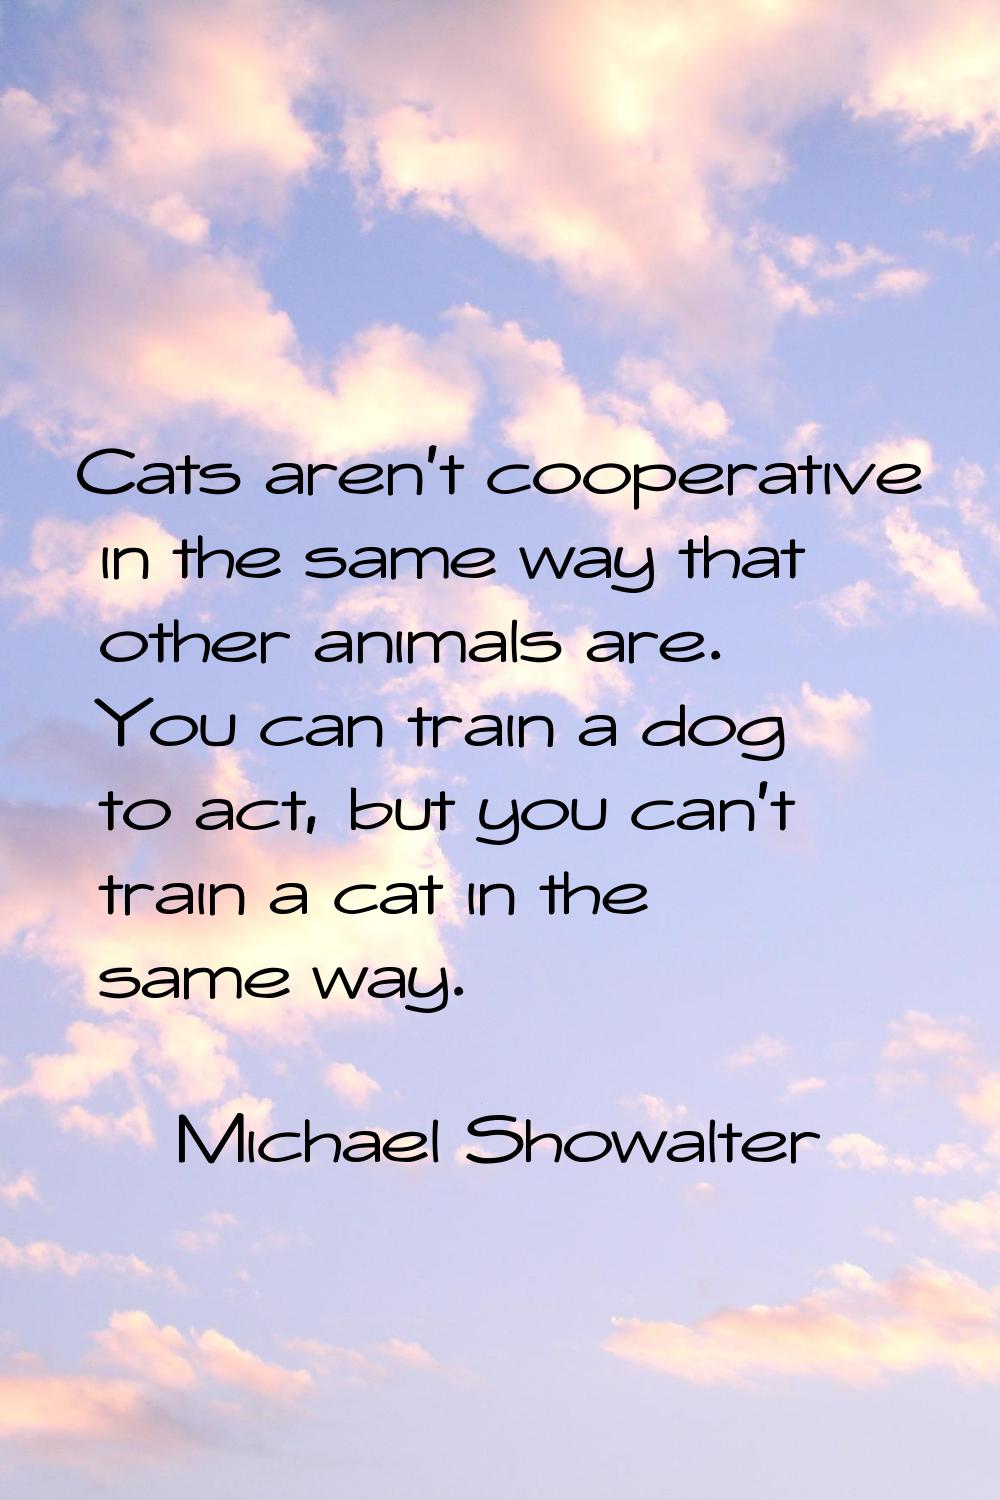 Cats aren't cooperative in the same way that other animals are. You can train a dog to act, but you